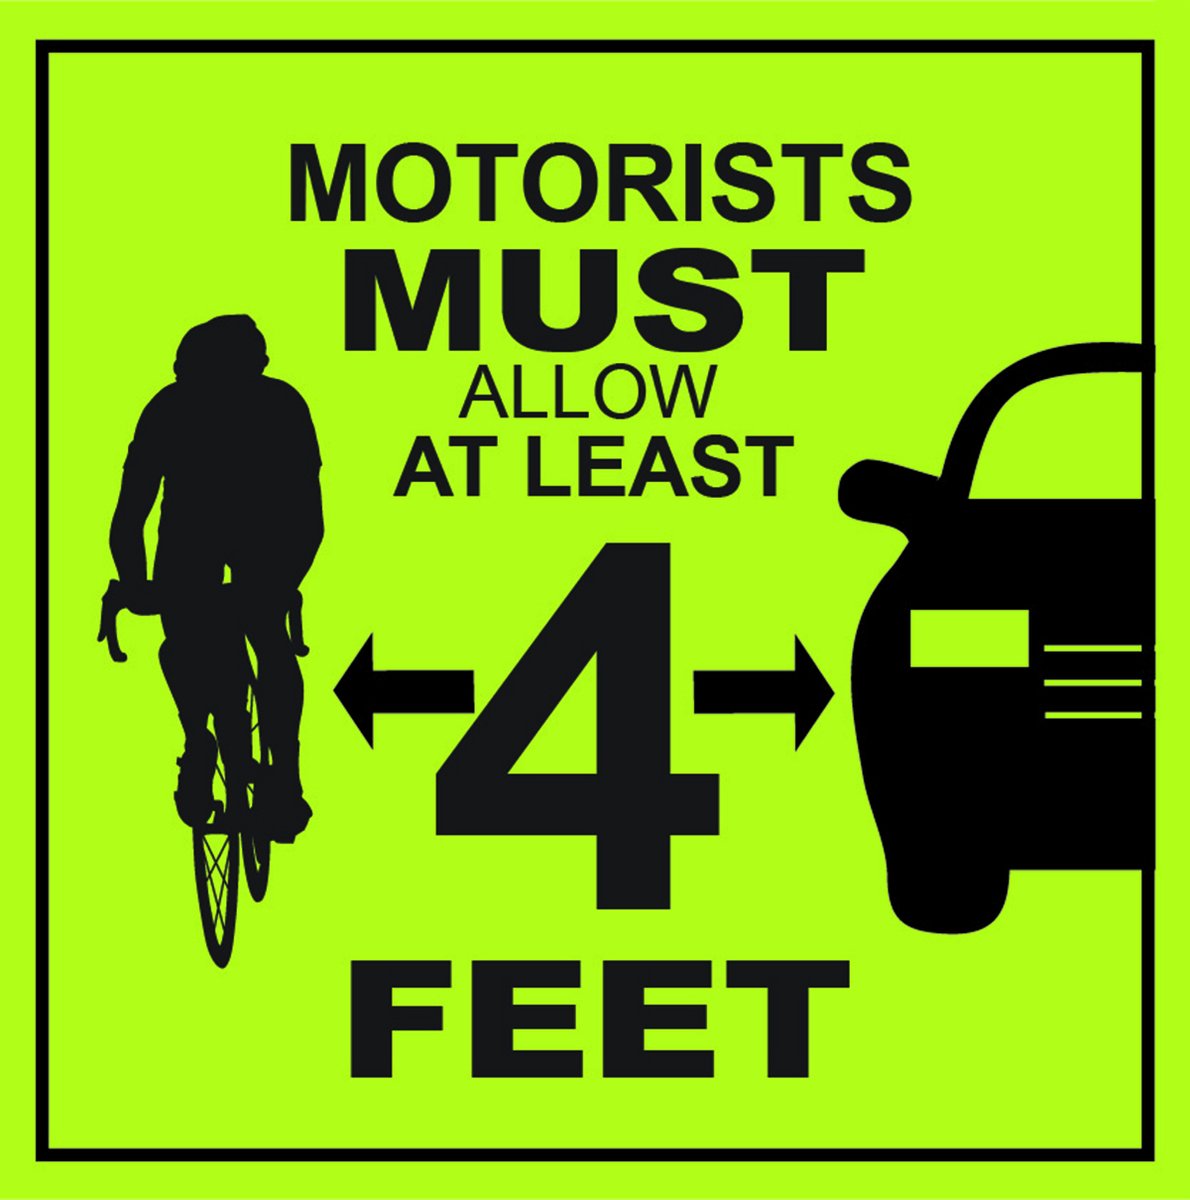 Drivers, make room for cyclists! 🚴 It’s the law! When you pass a bicycle, you must give them four feet of space and may cross the double yellow line to do so when safe. Visit bit.ly/PennDOTBicycle… to learn more about bike safety laws. #BikeSafetyMonth